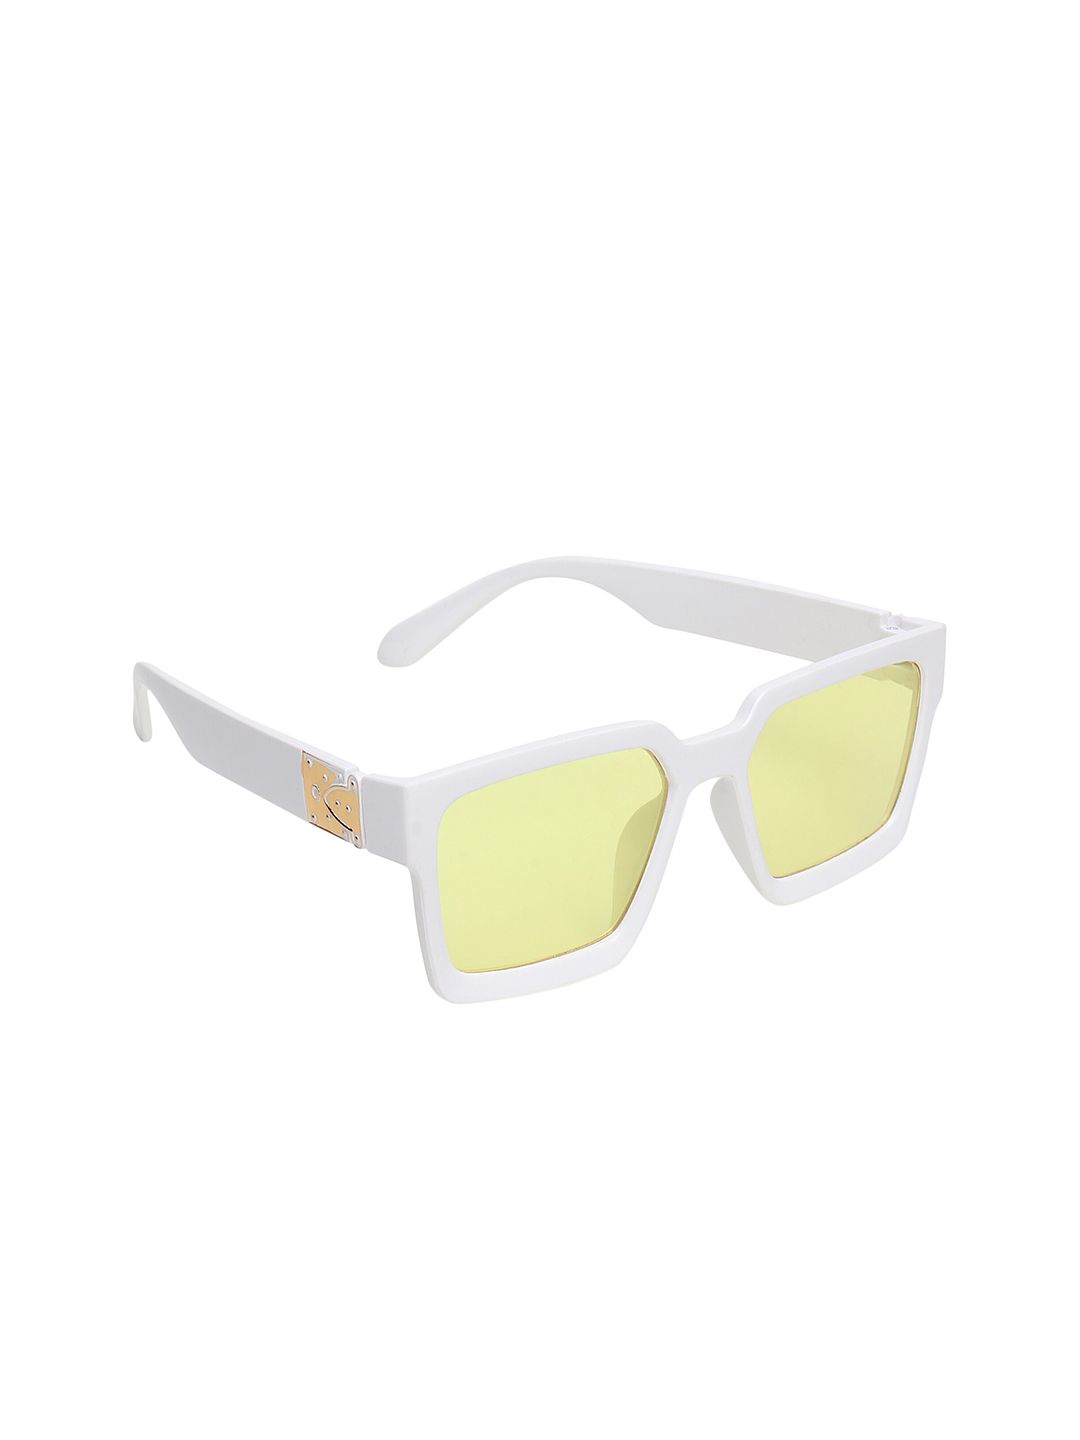 CRIBA Unisex Yellow Lens & White Wayfarer Sunglasses with UV Protected Lens Price in India